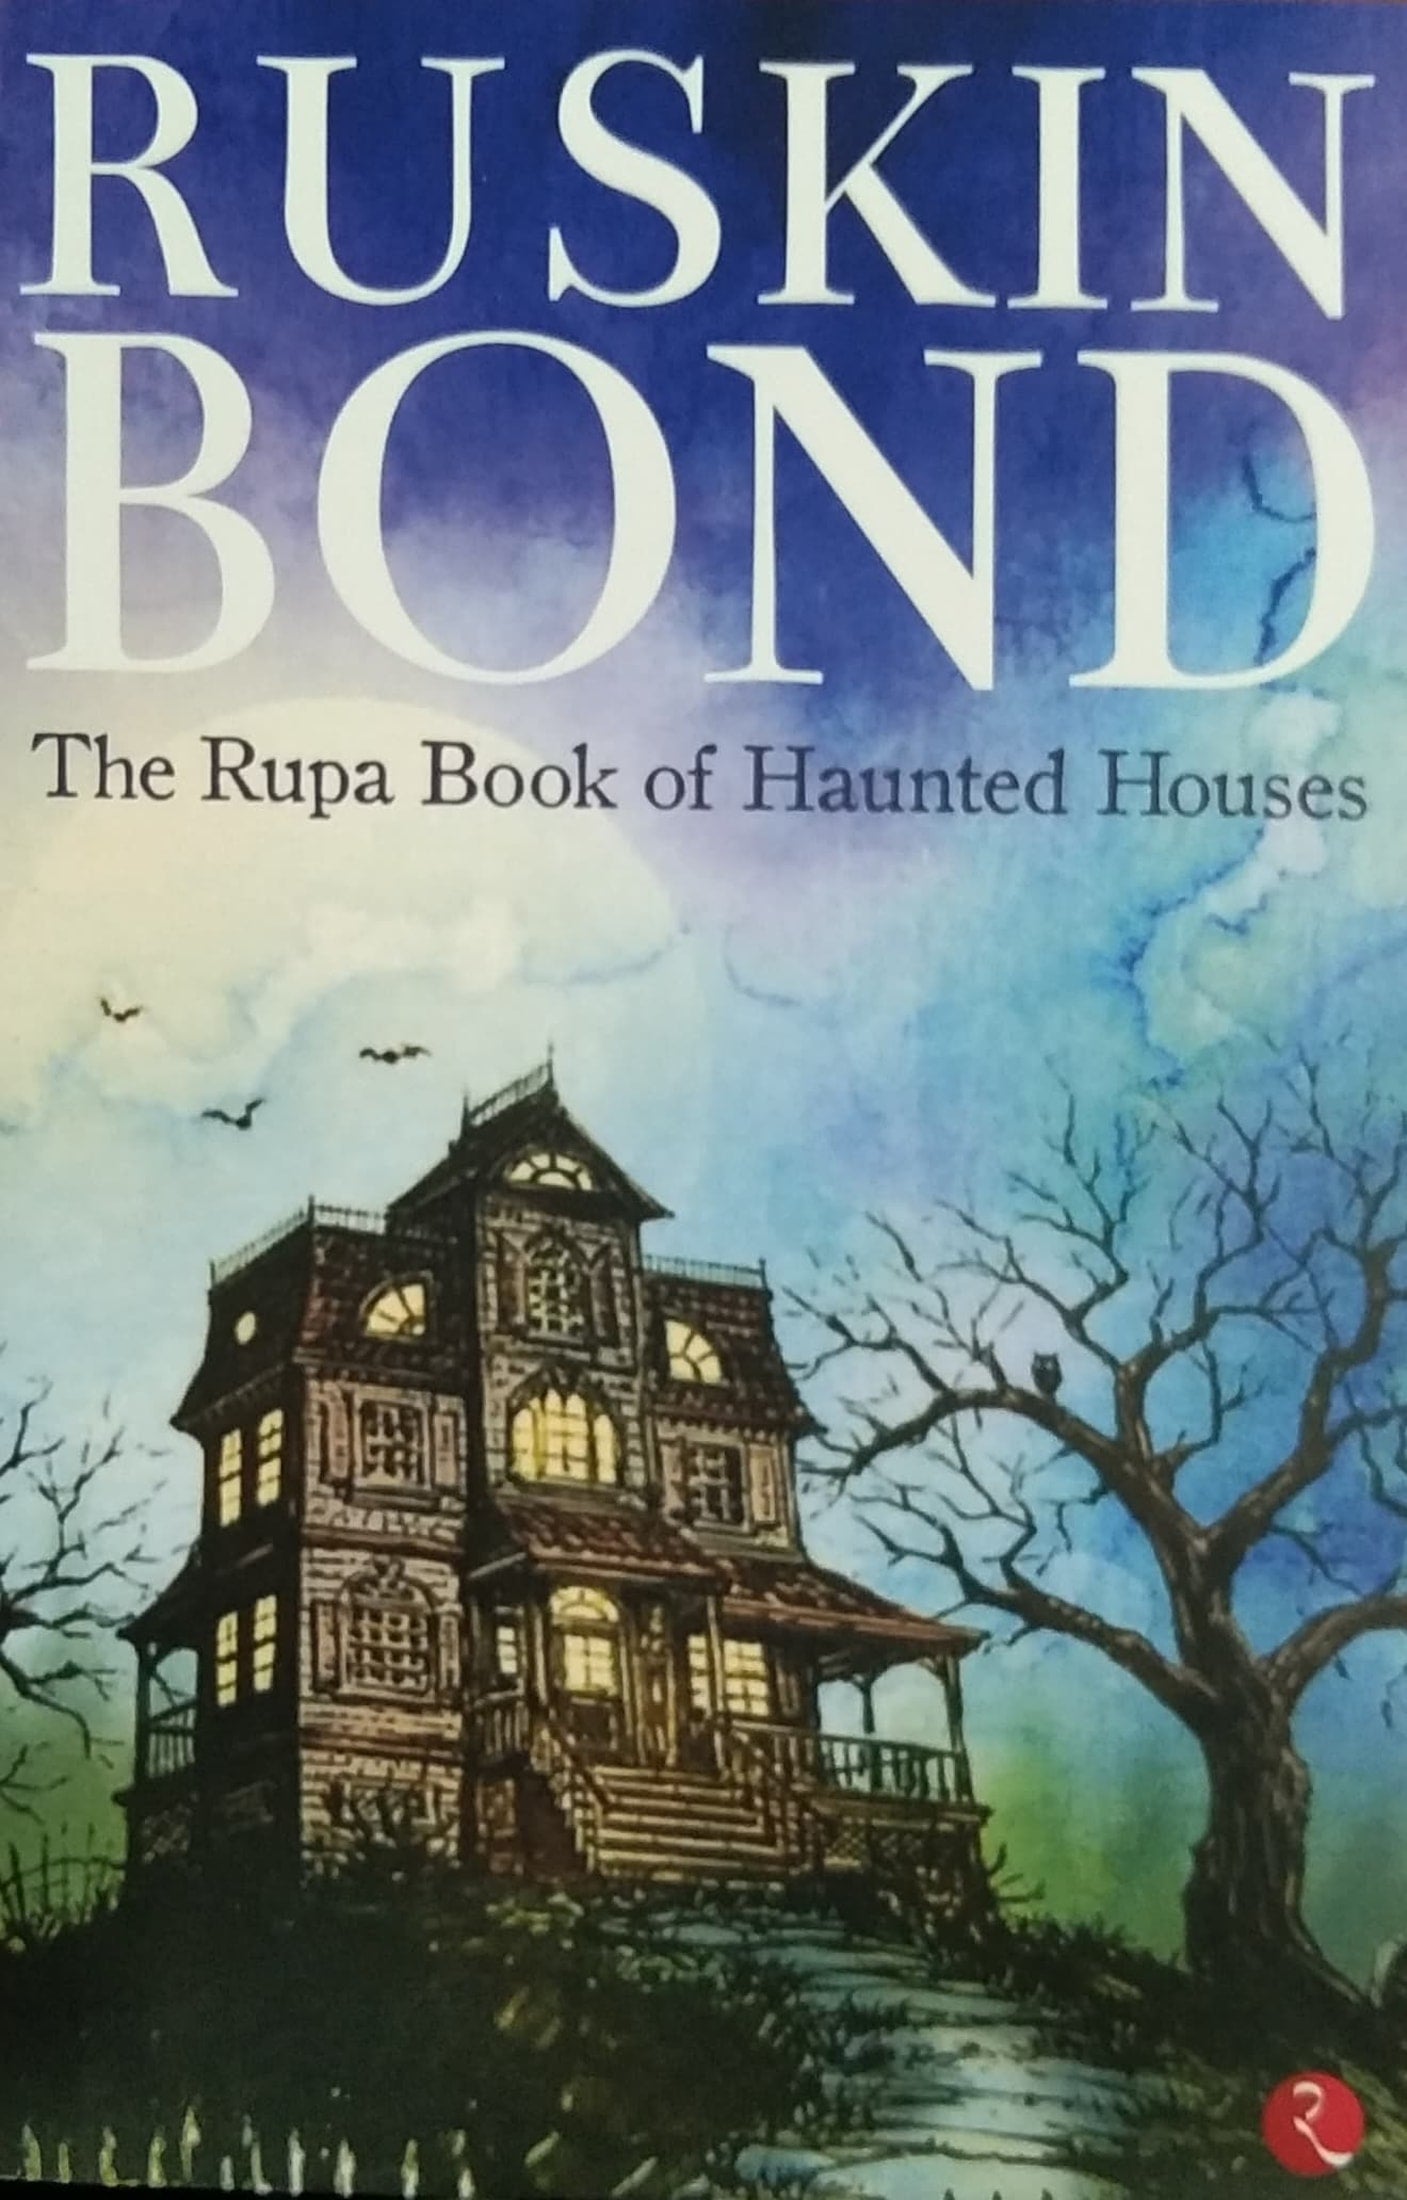 The Rupa Book of Haunted Houses